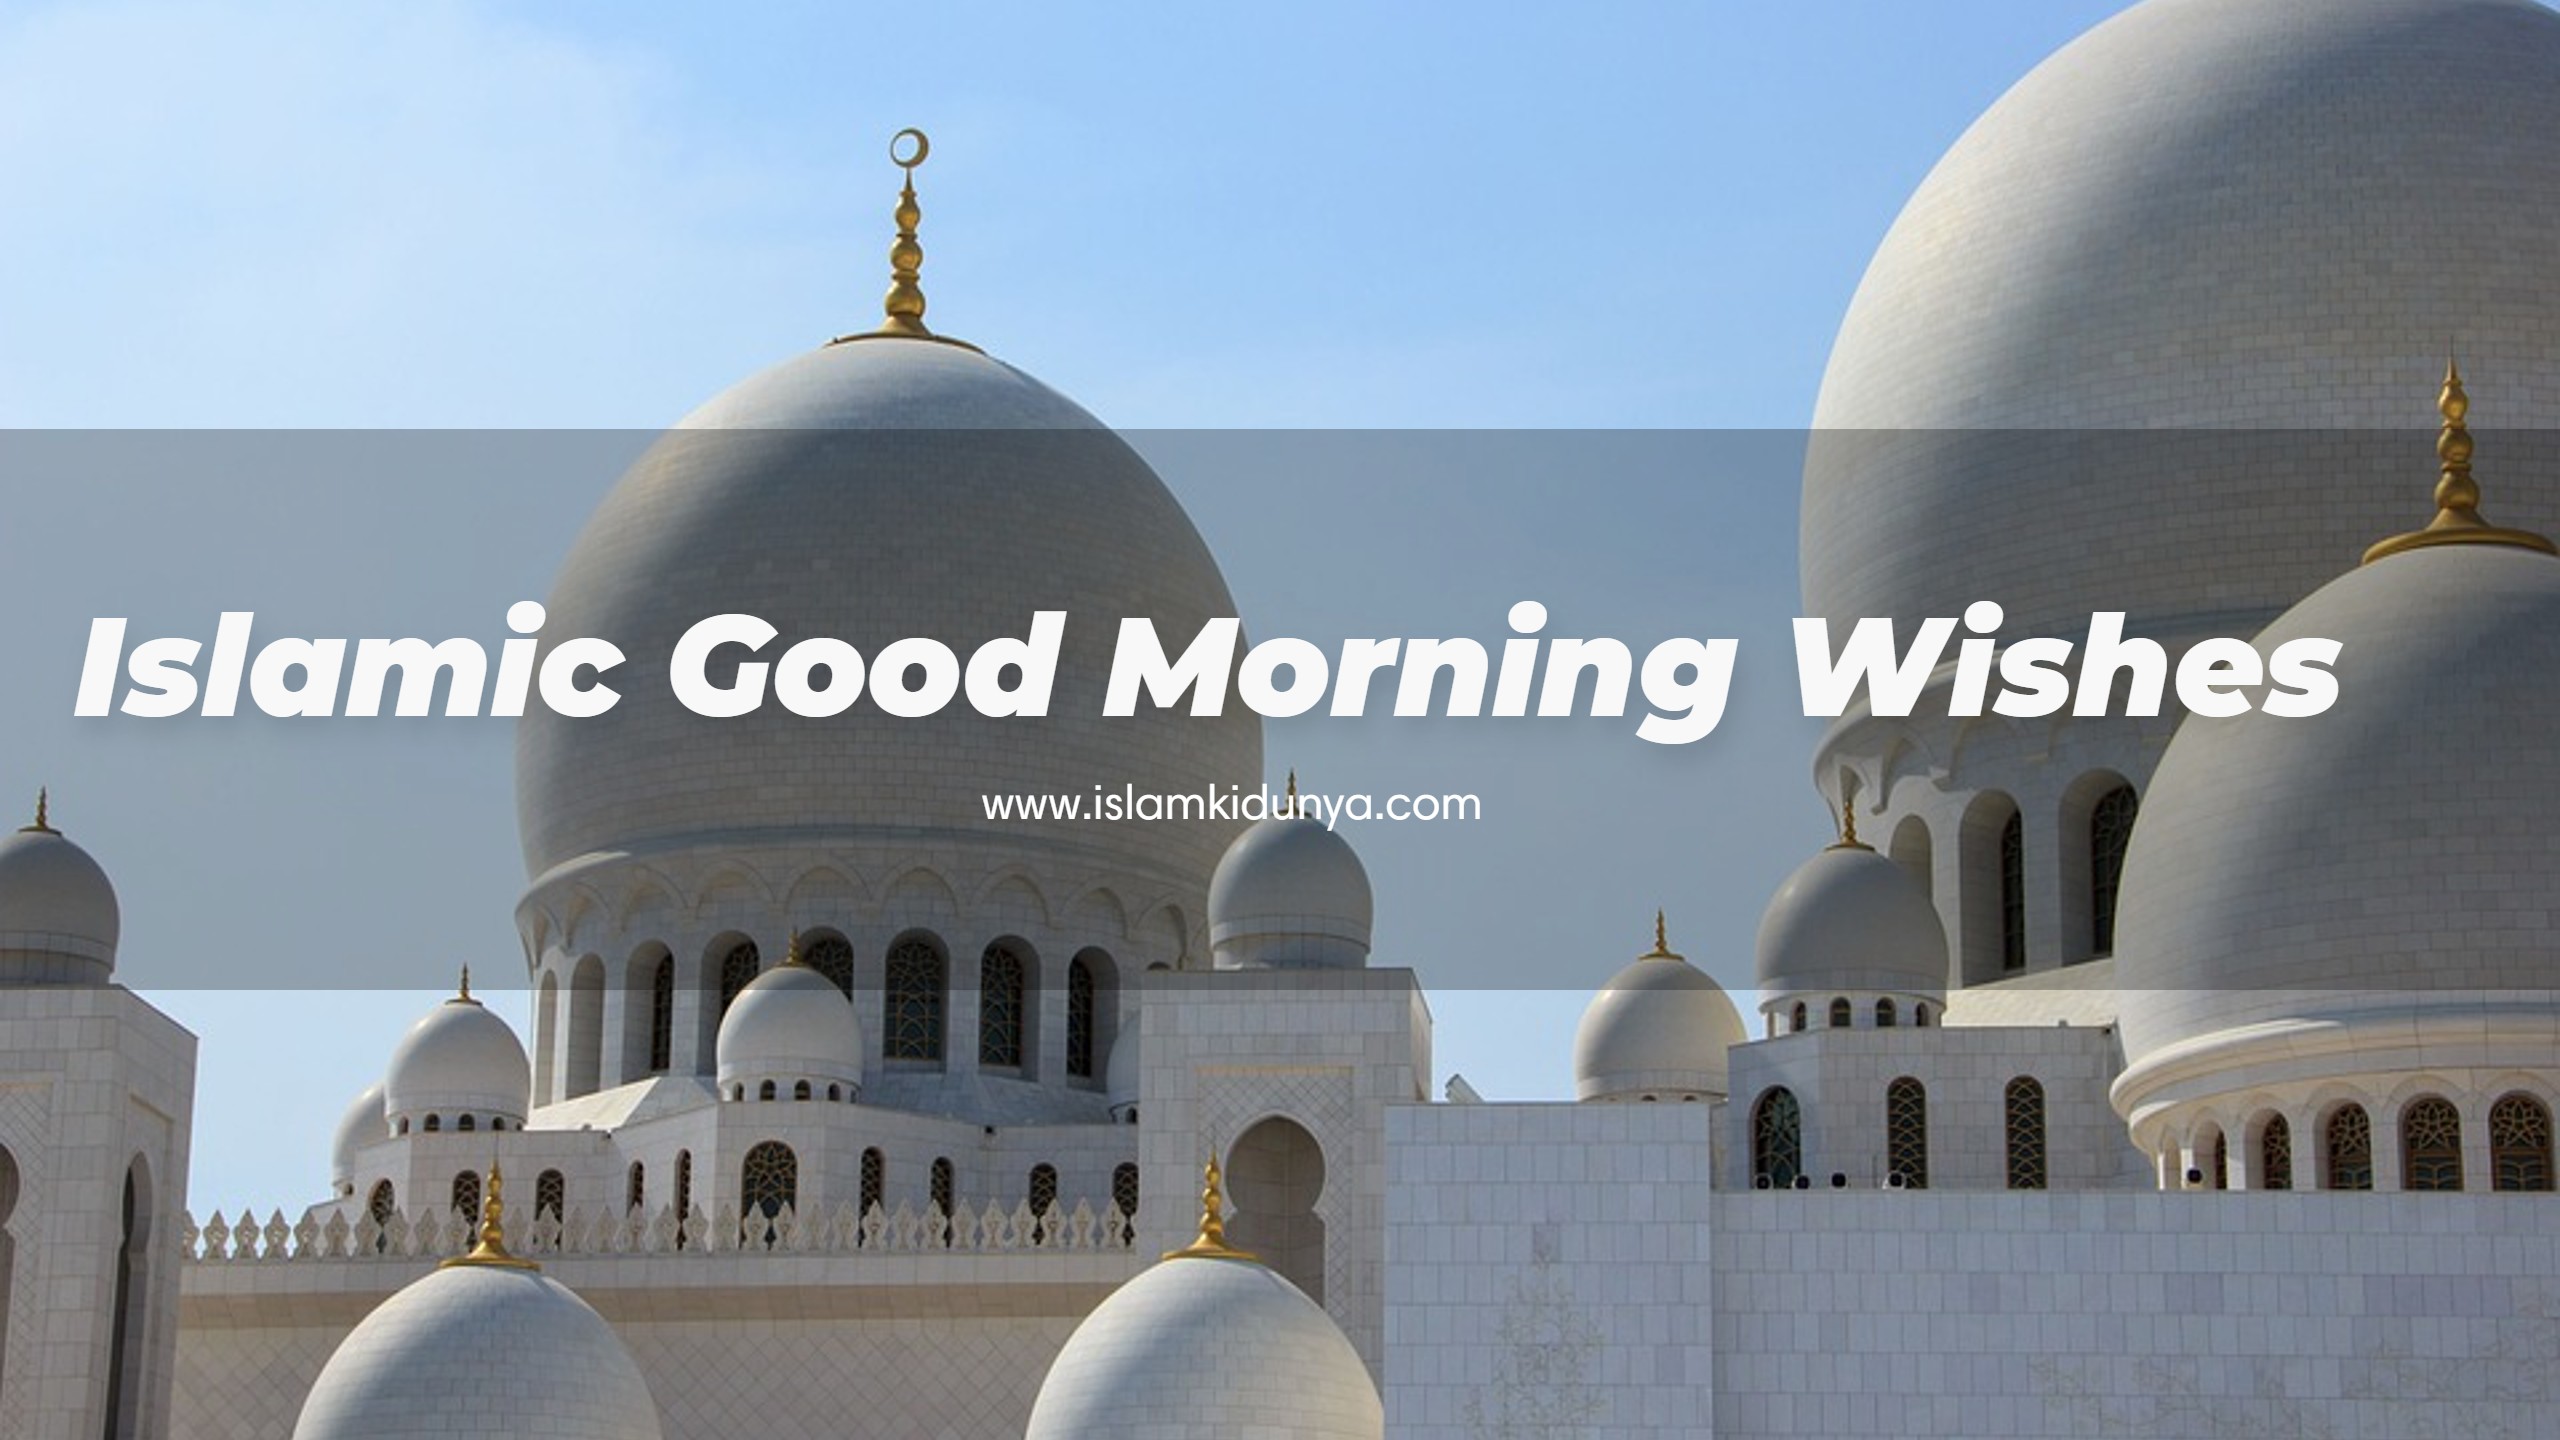 Good Morning Quotes for Muslims - Islamic Good Morning Duas/Quotes